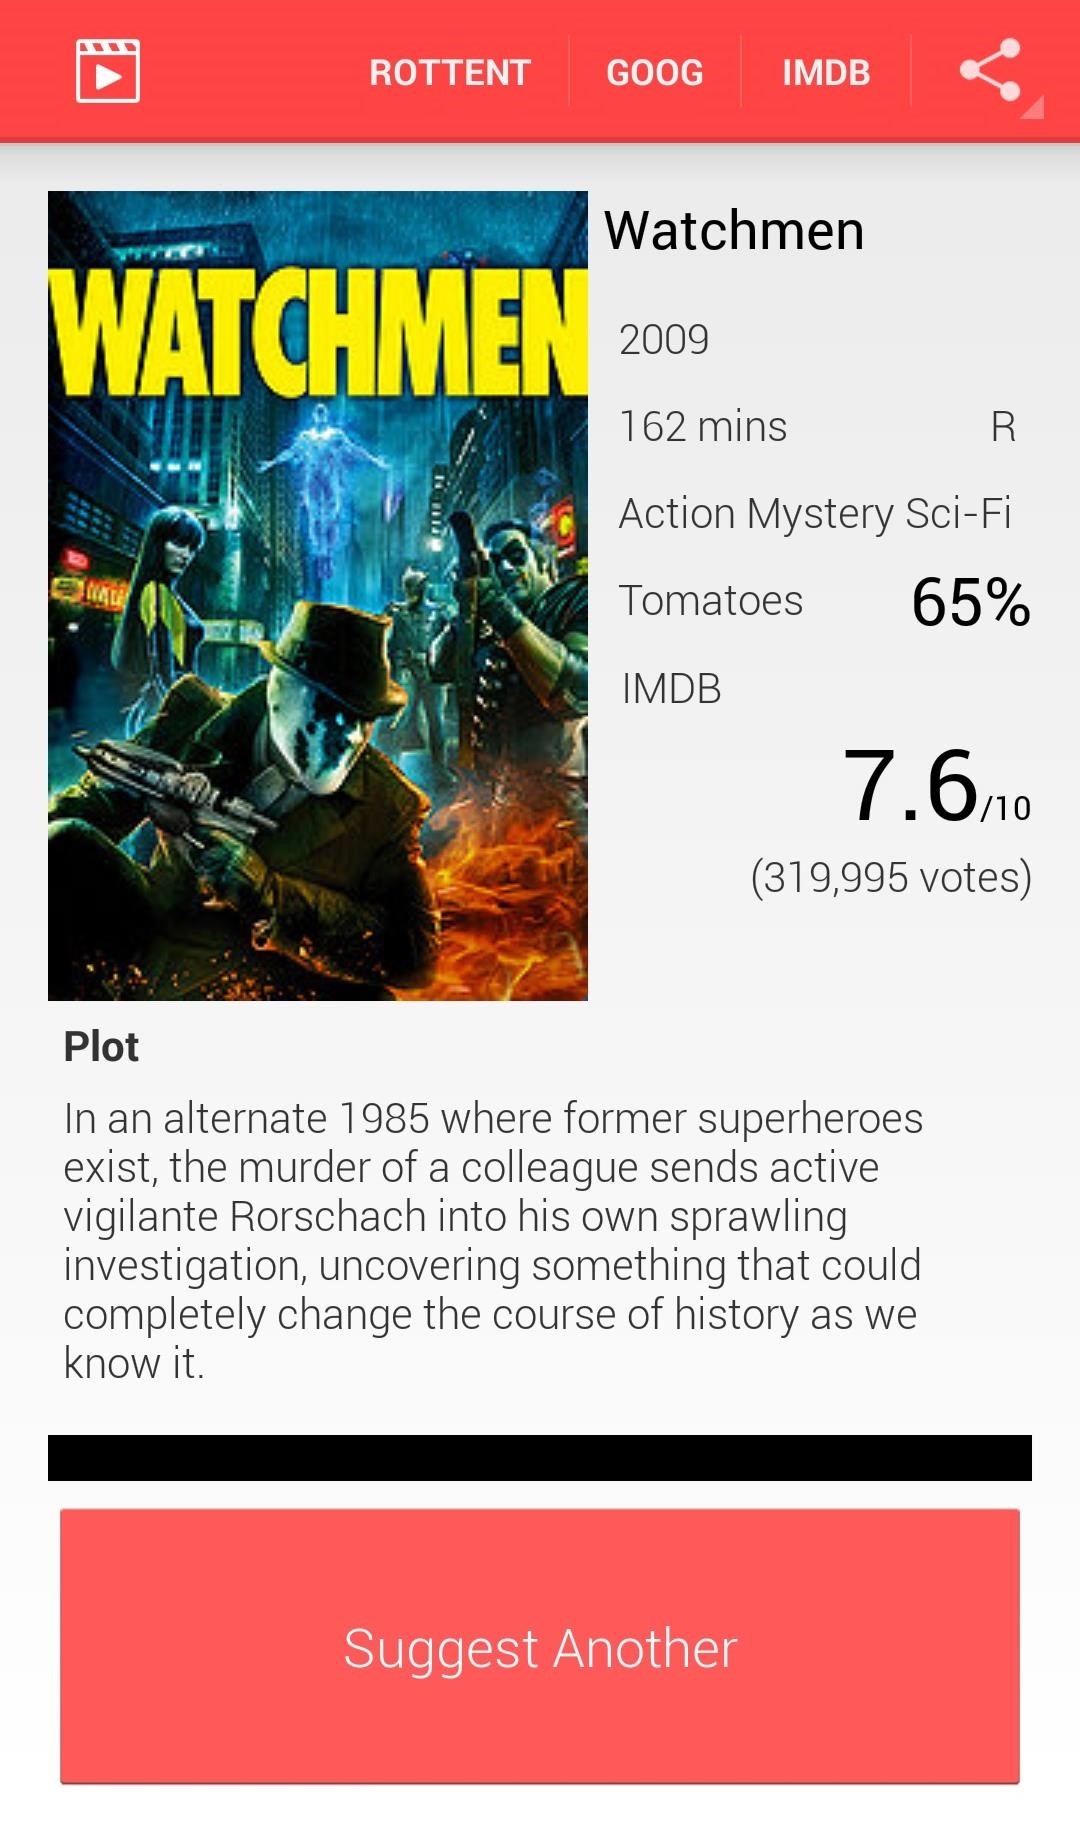 Suggest Movie for Android: A Simple Way to Search for Good Flicks